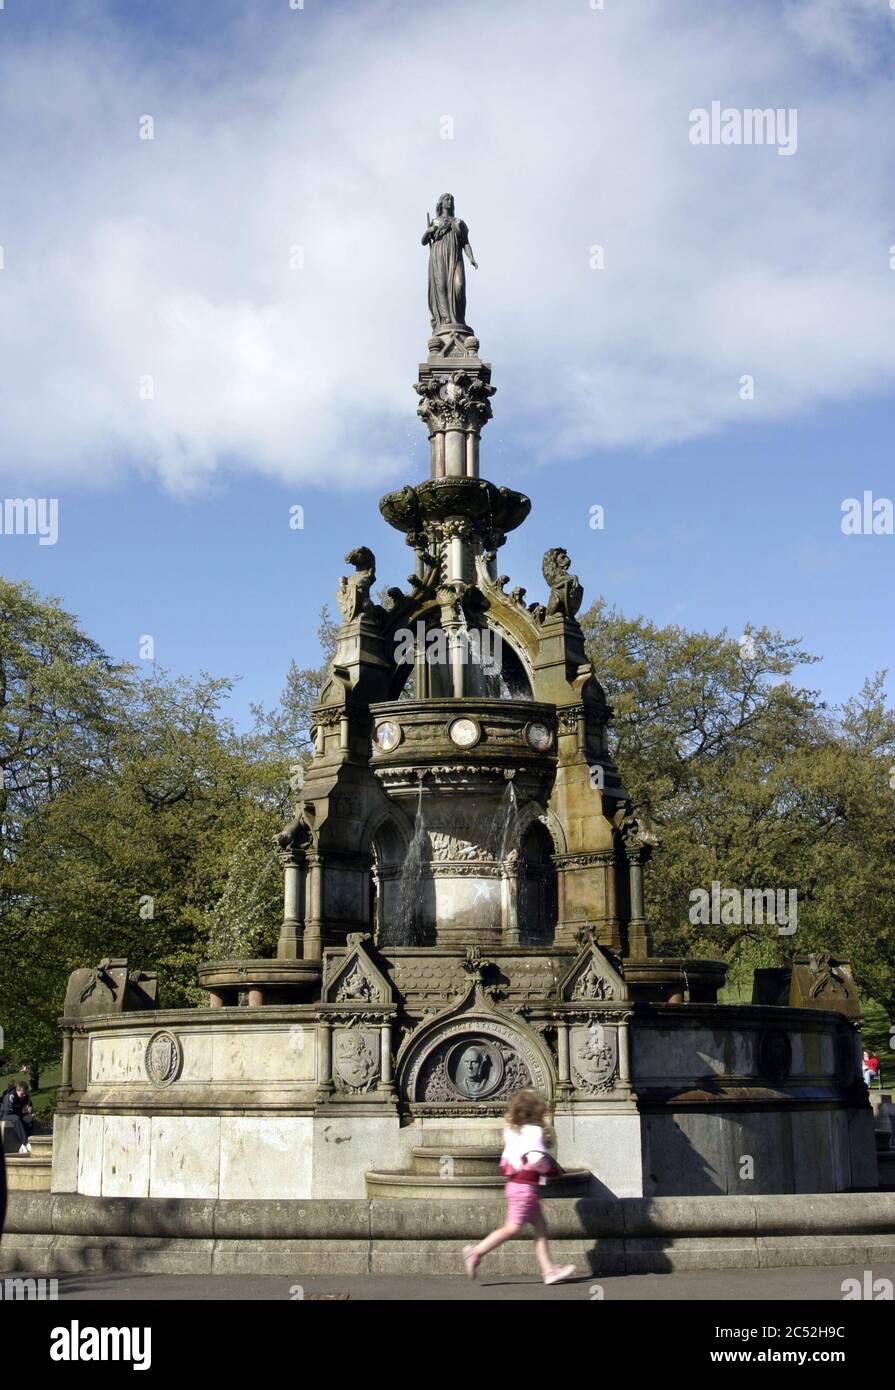 The Stewart Memorial fountain in Kelvingrove park, Glasgow, was erected in 1872 to the memory of the Lord Provost Robert Stewart who paved the way for a fresh water supply to the city of Glasgow. Alan Wylie/ALAMY © Stock Photo